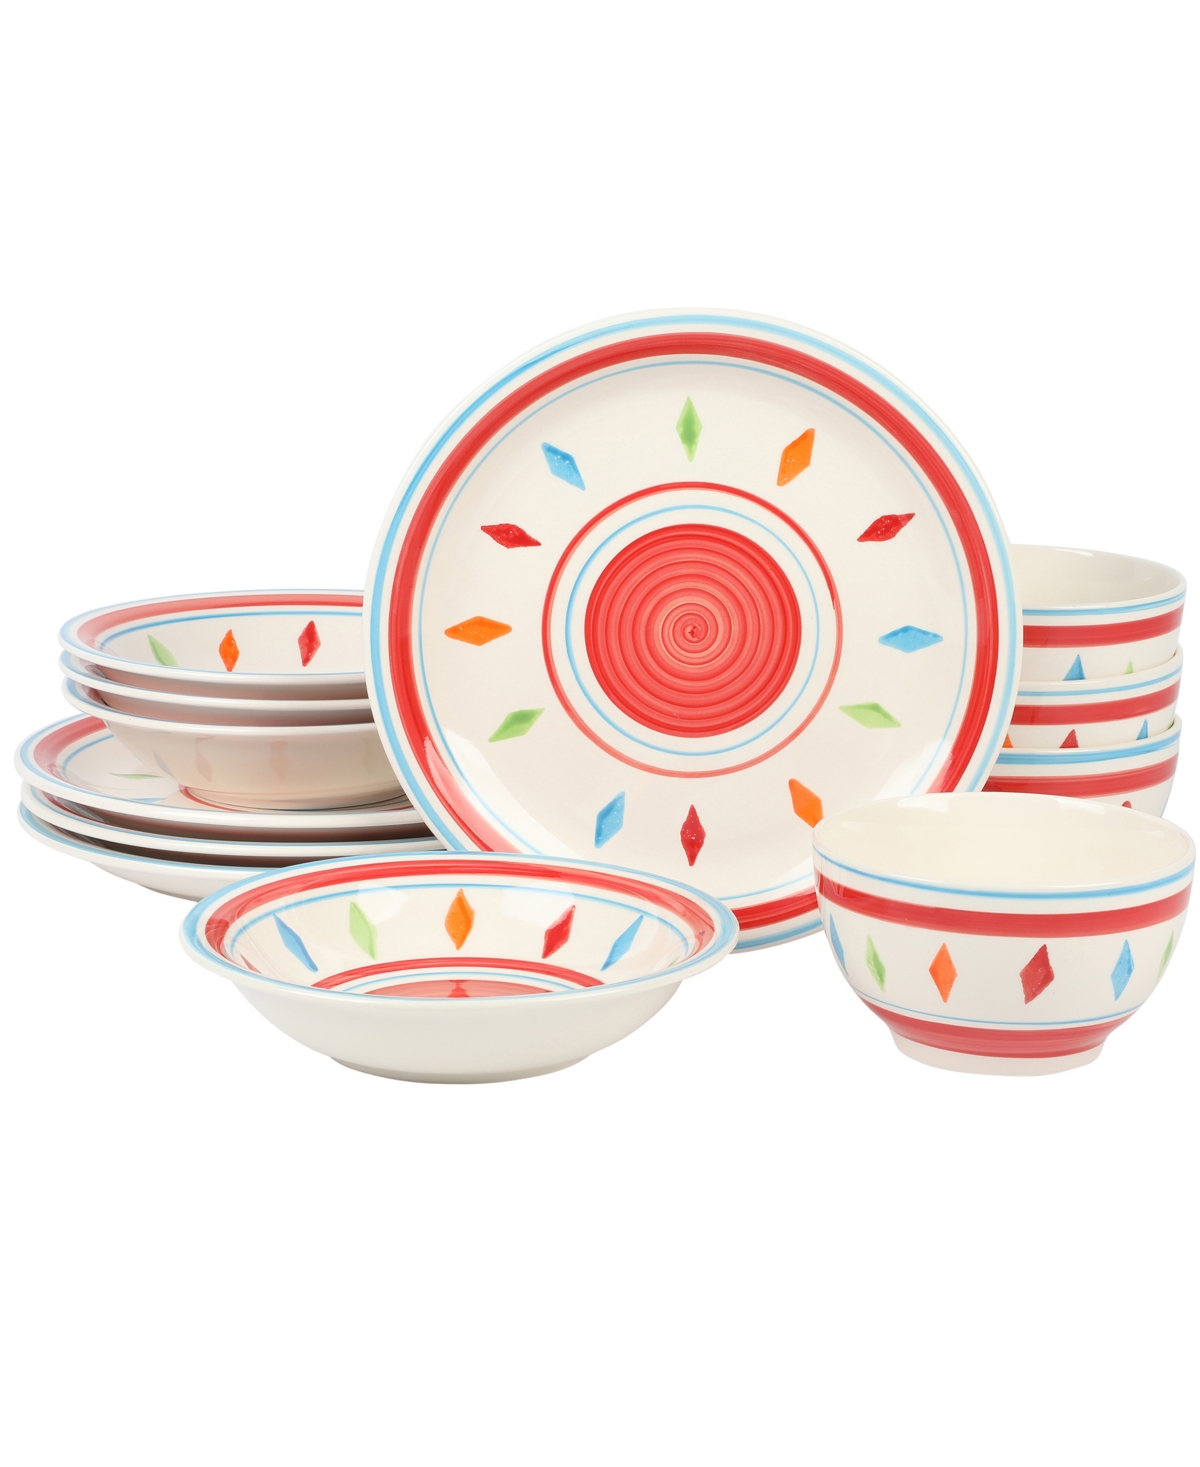 Home Heidy 12 Piece Hand Painted Dinnerware Sets, Service for 4 - Green